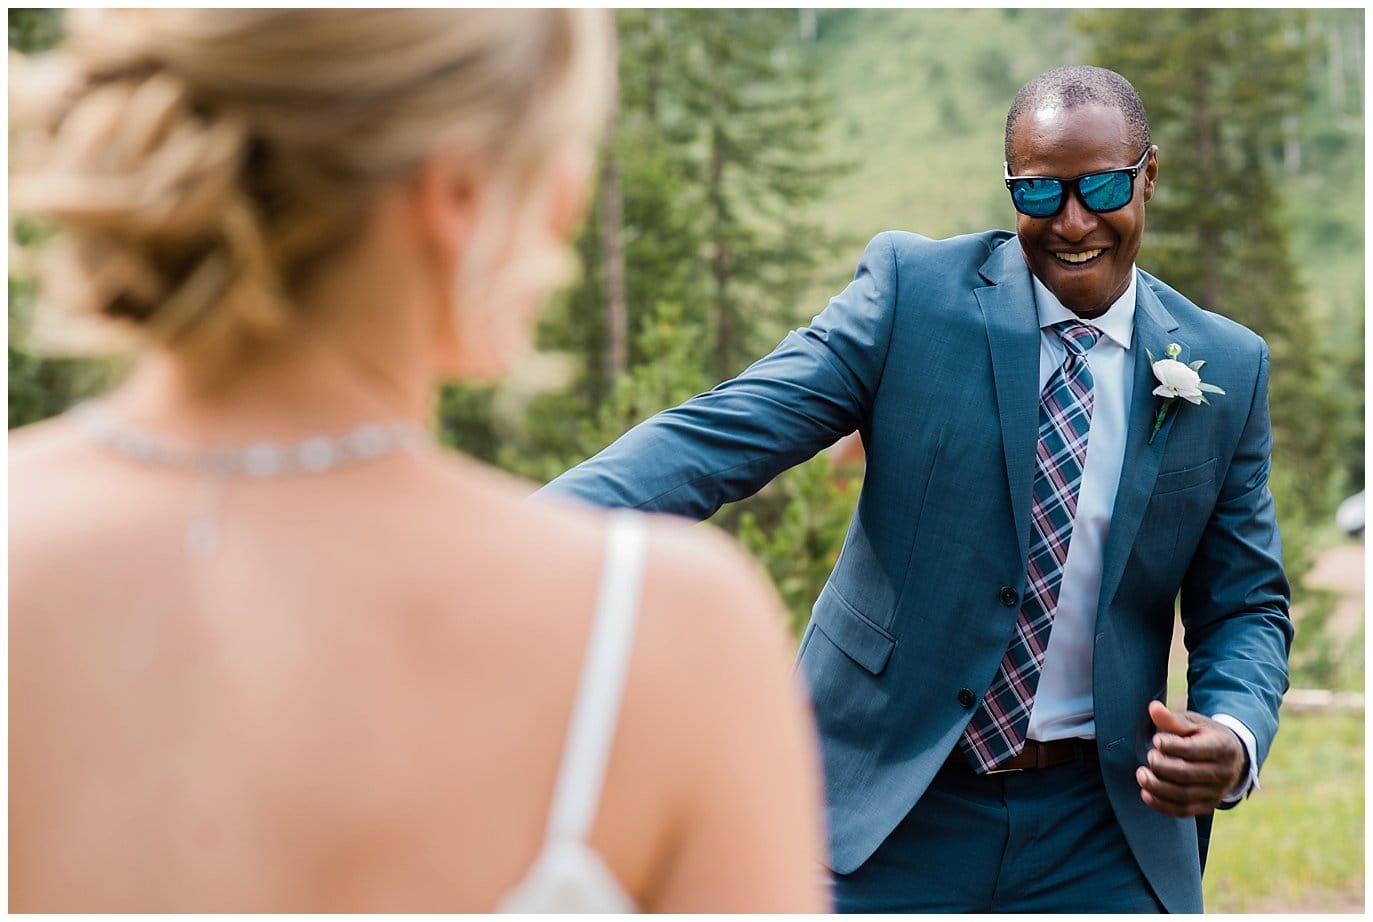 dancing groomsmen in sunglasses photo at Piney River Ranch wedding by Vail wedding photographer Jennie Crate photographer